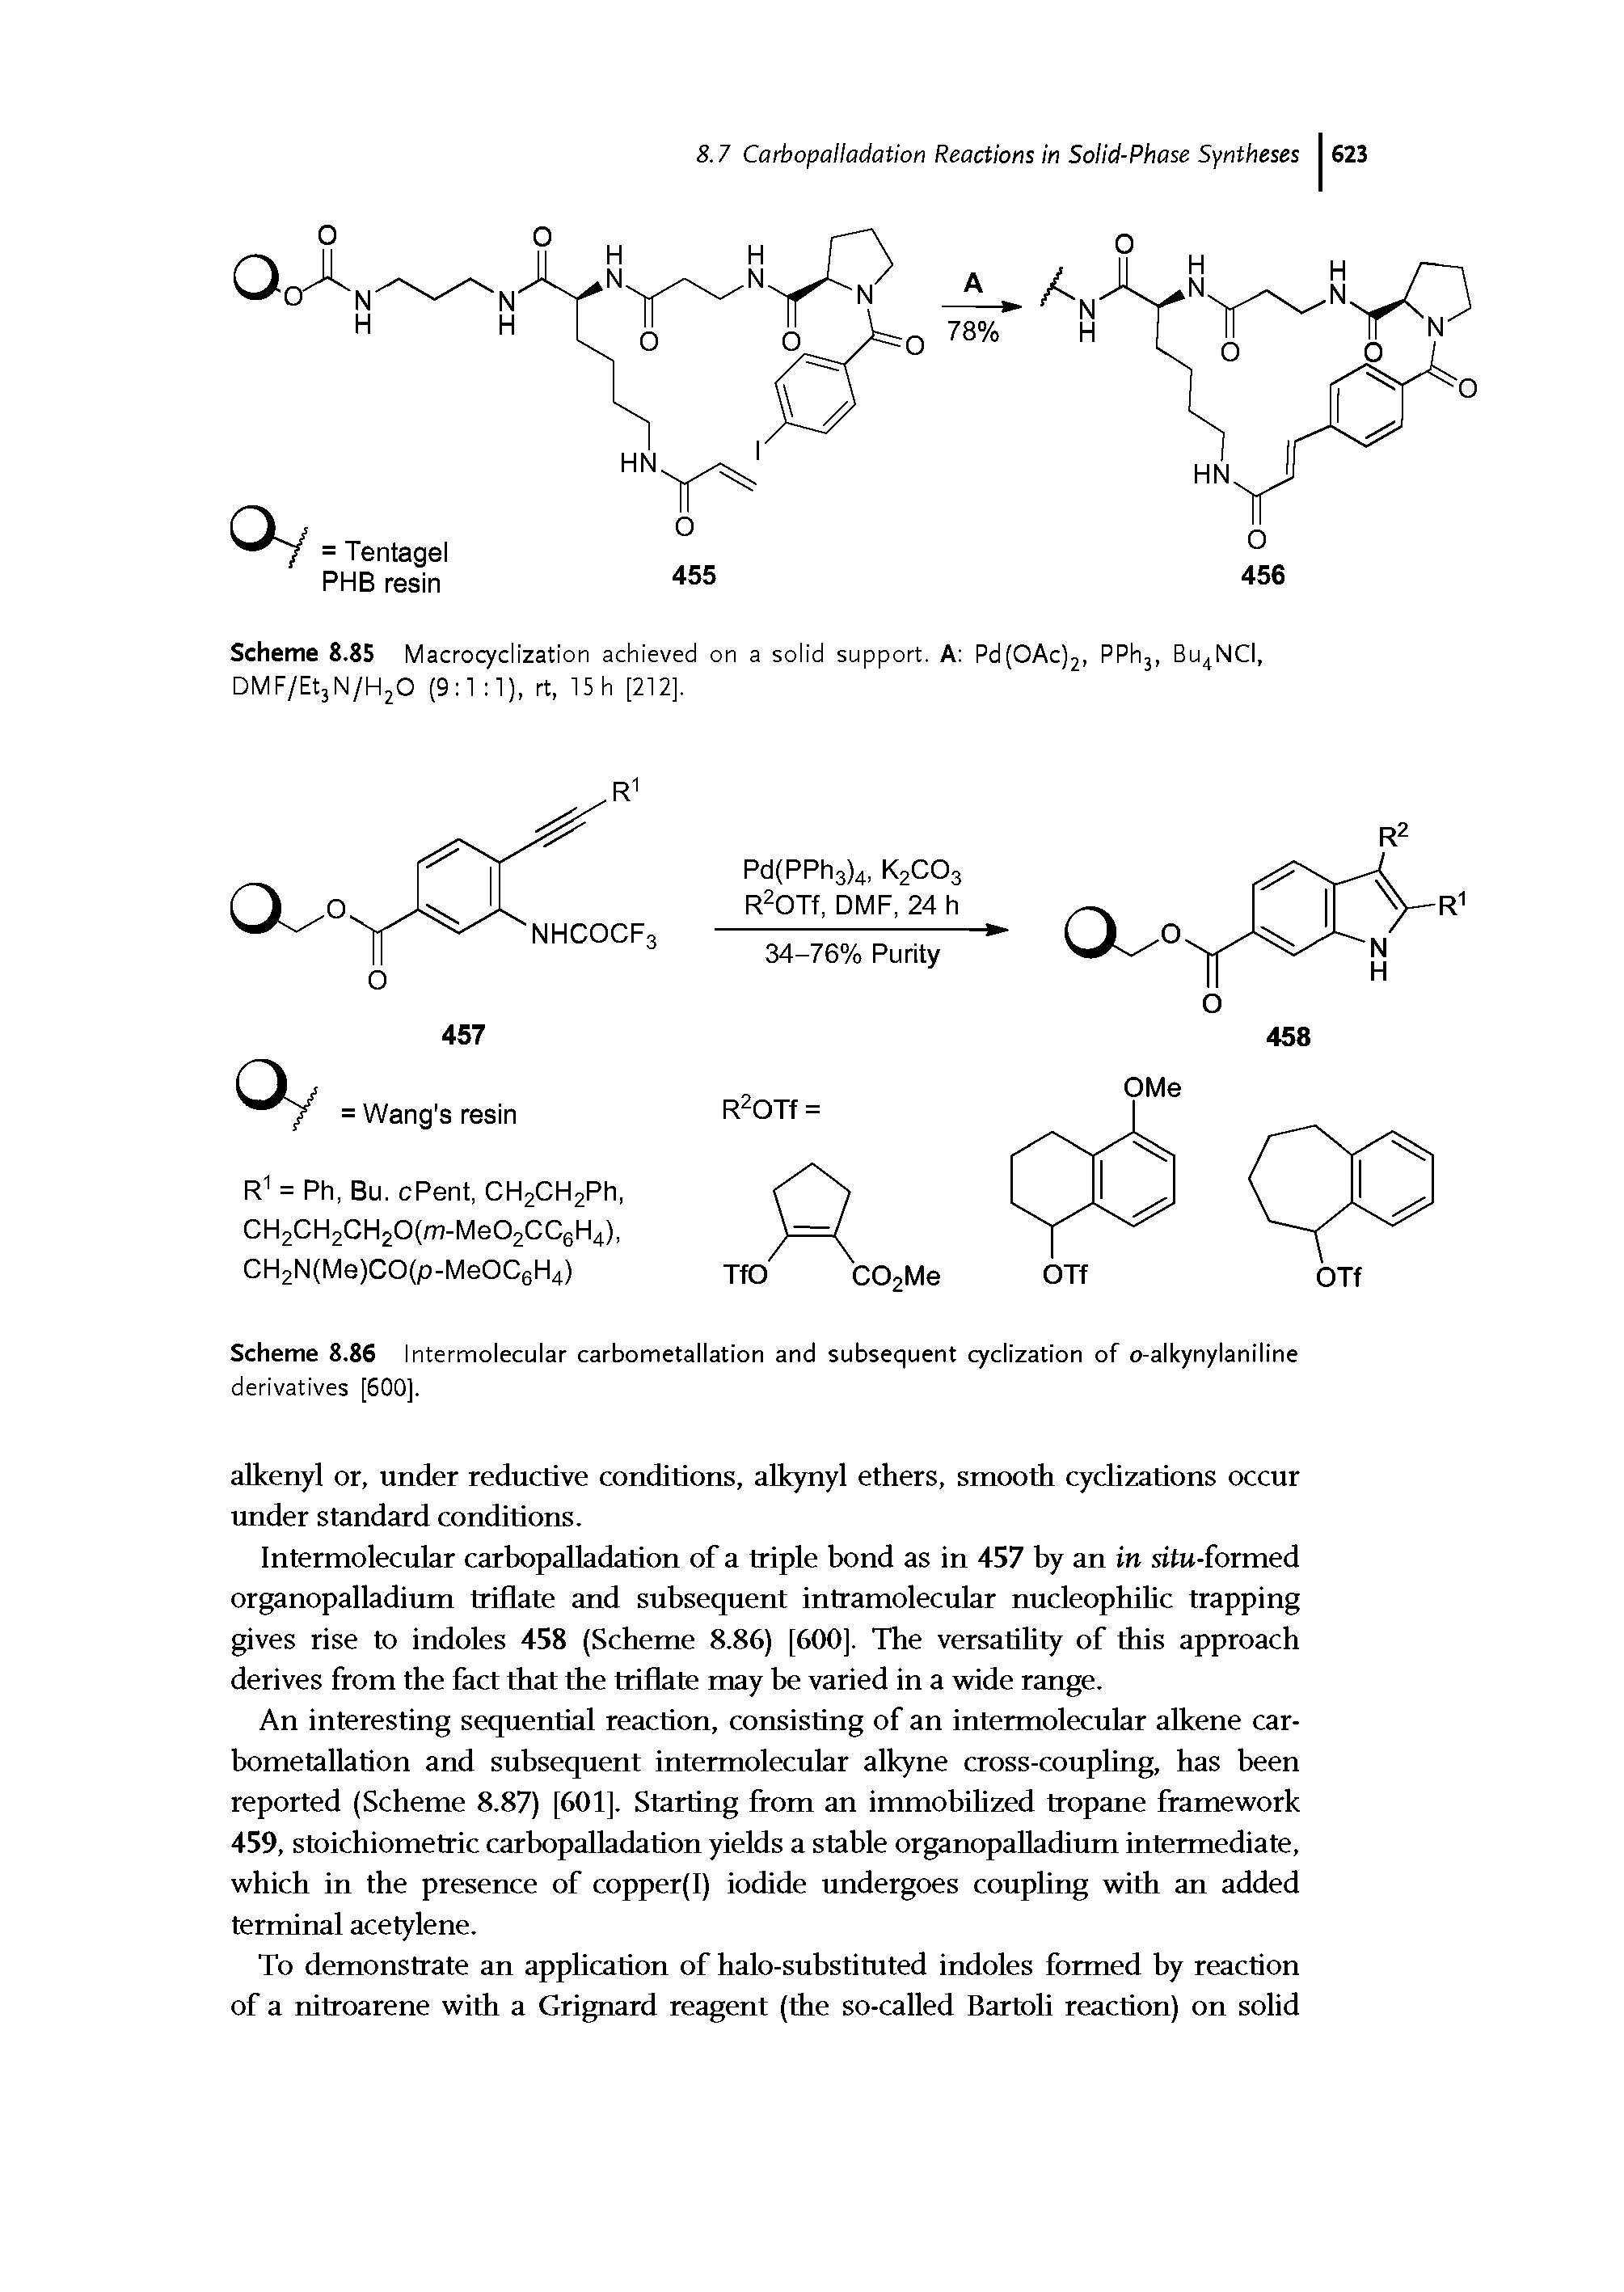 Scheme 8.86 Intermolecular carbometallation and subsequent cyclization of o-alkynylaniline derivatives [500].